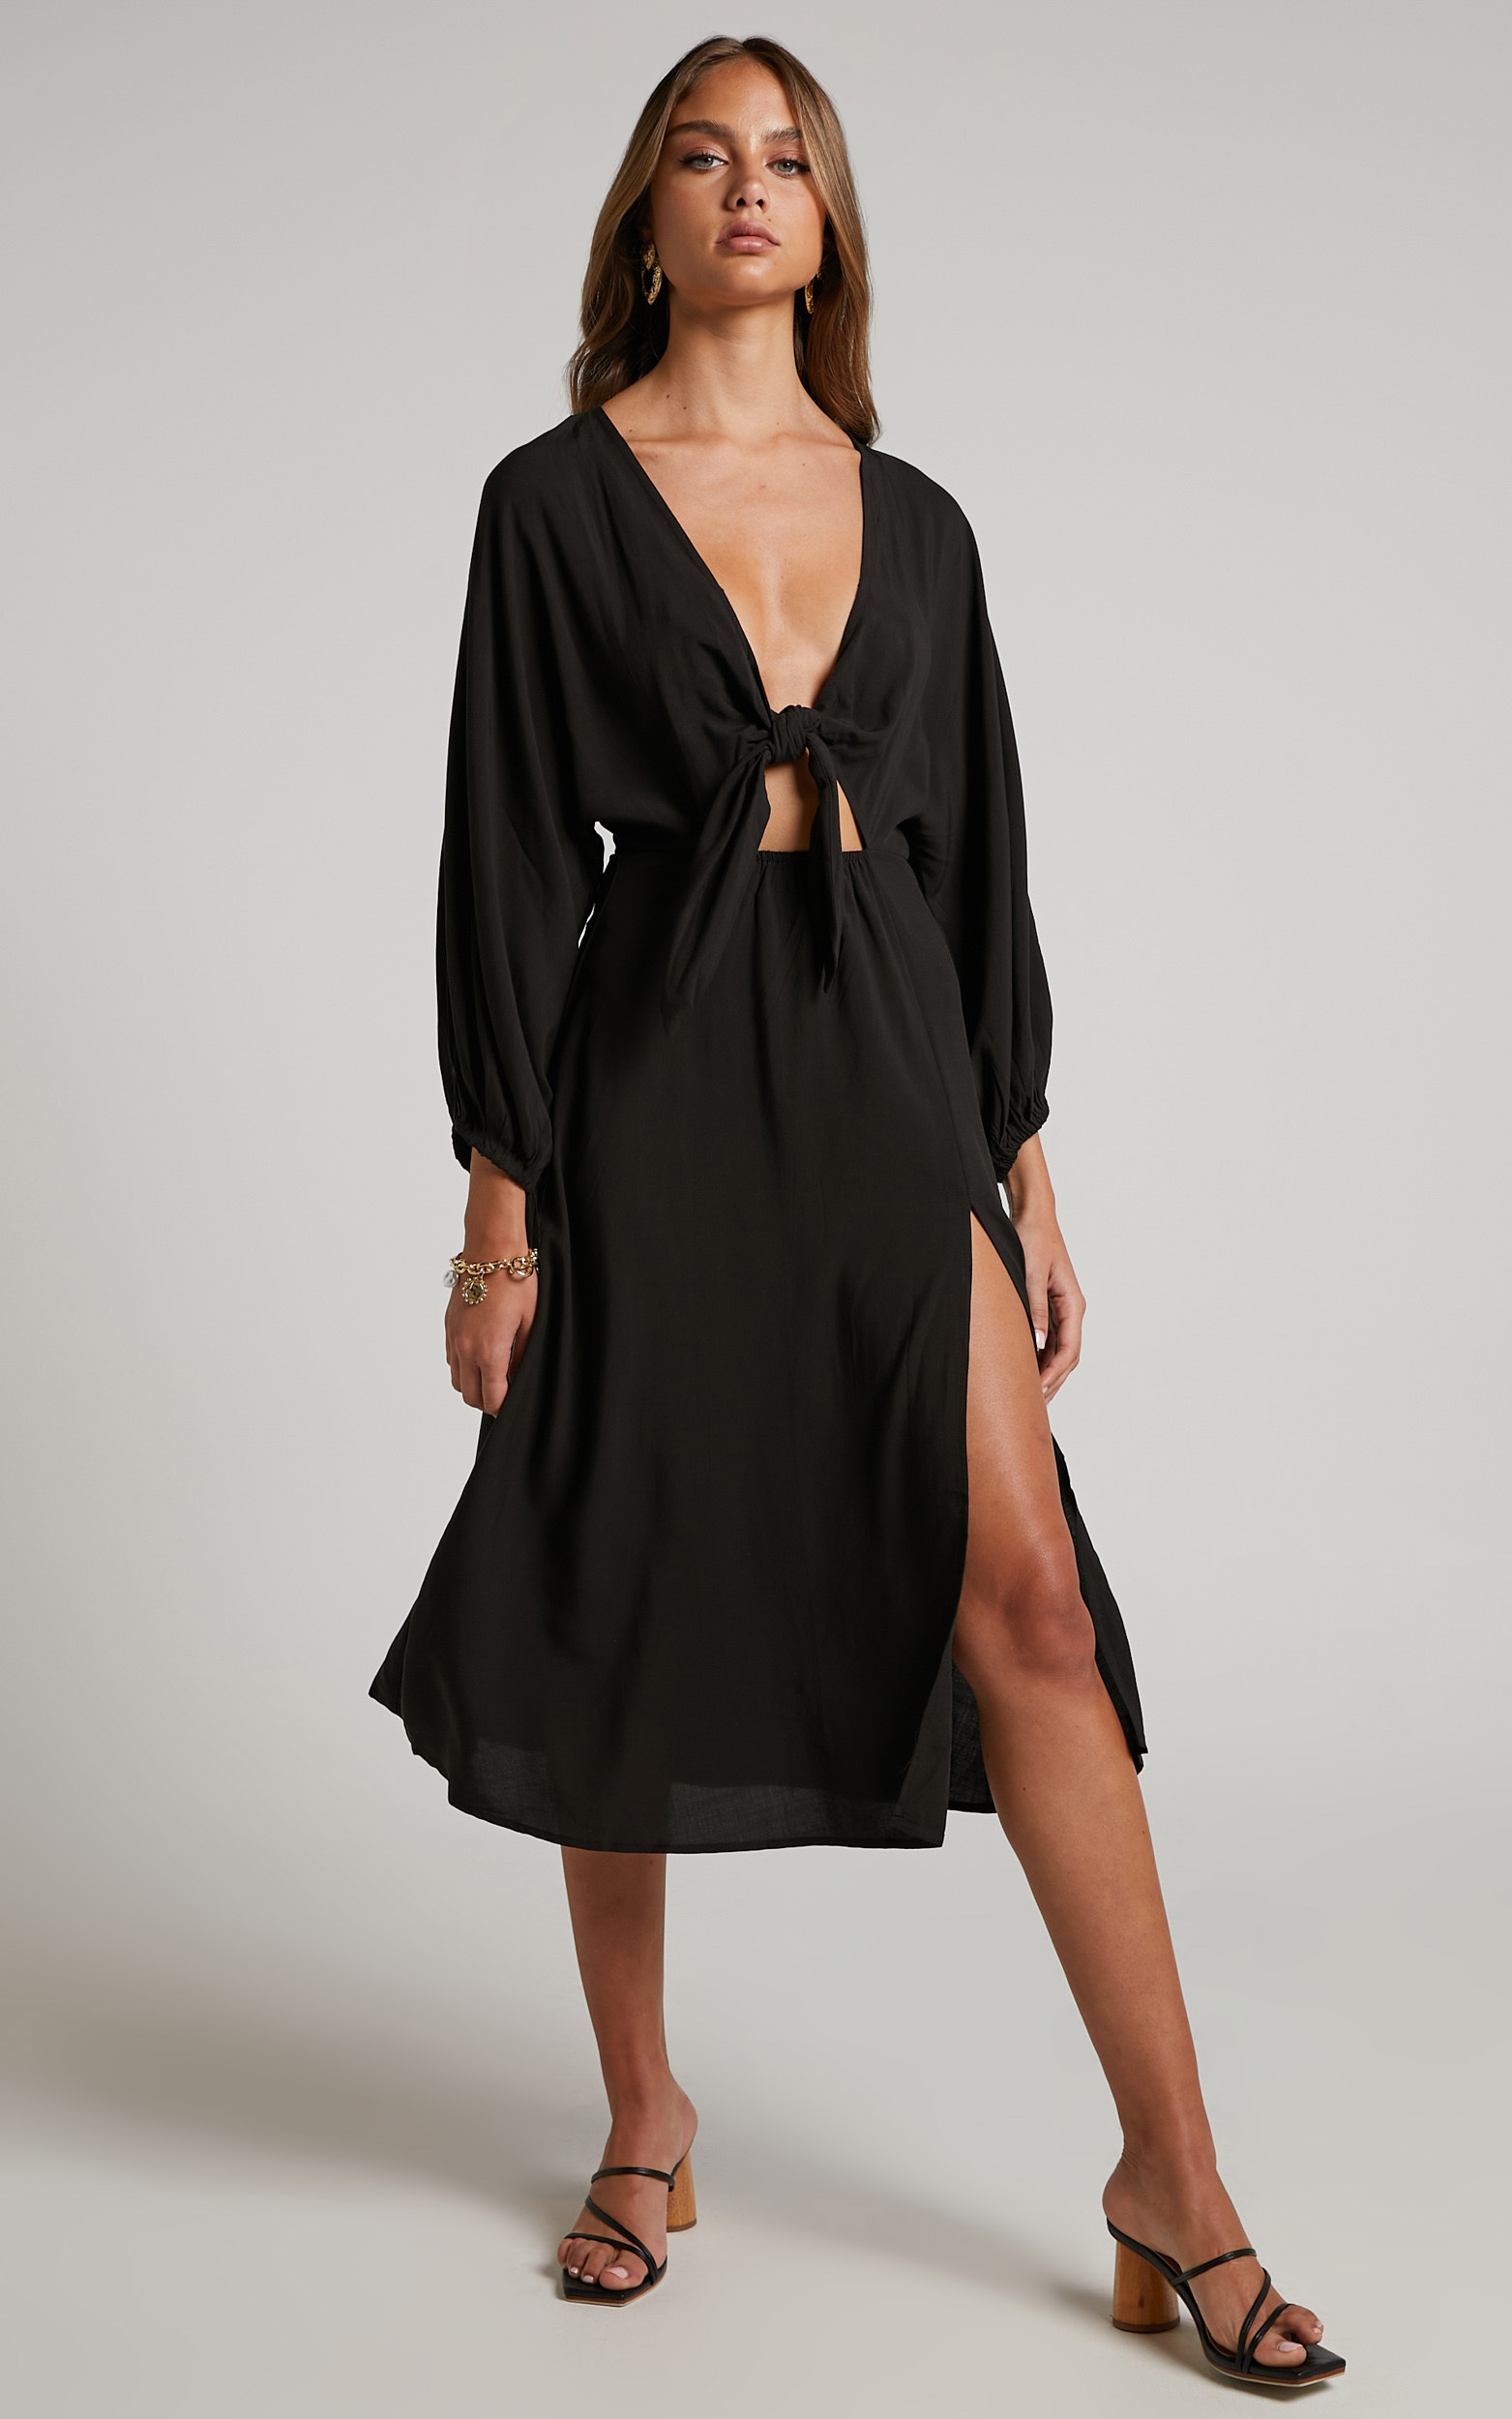 Tyricia Long Sleeve Tie Front Cut Out Midi Dress in Black - 04, BLK1, hi-res image number null